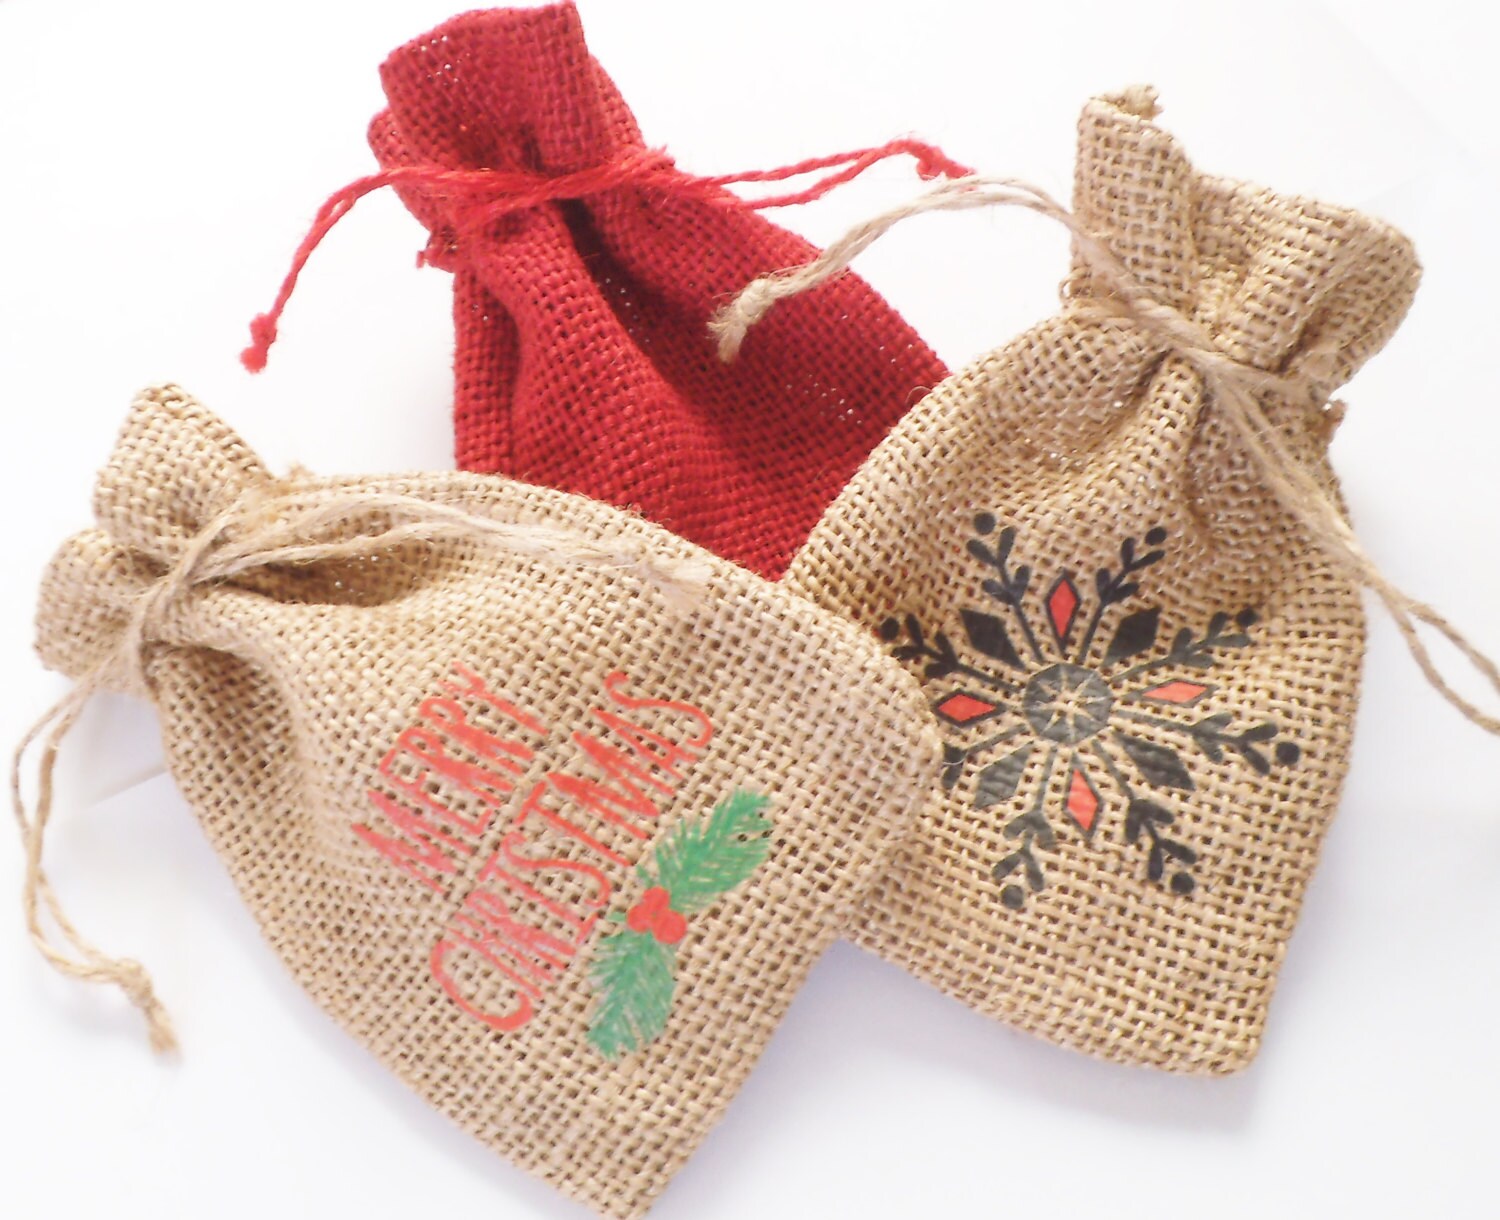 Buy Red Dot Gift 50-Packed Burlap Bags With Drawstring Gift Jute Bags Used  For Gift Packing (Blue, 10*15cm) Online - Shop Home & Garden on Carrefour  UAE